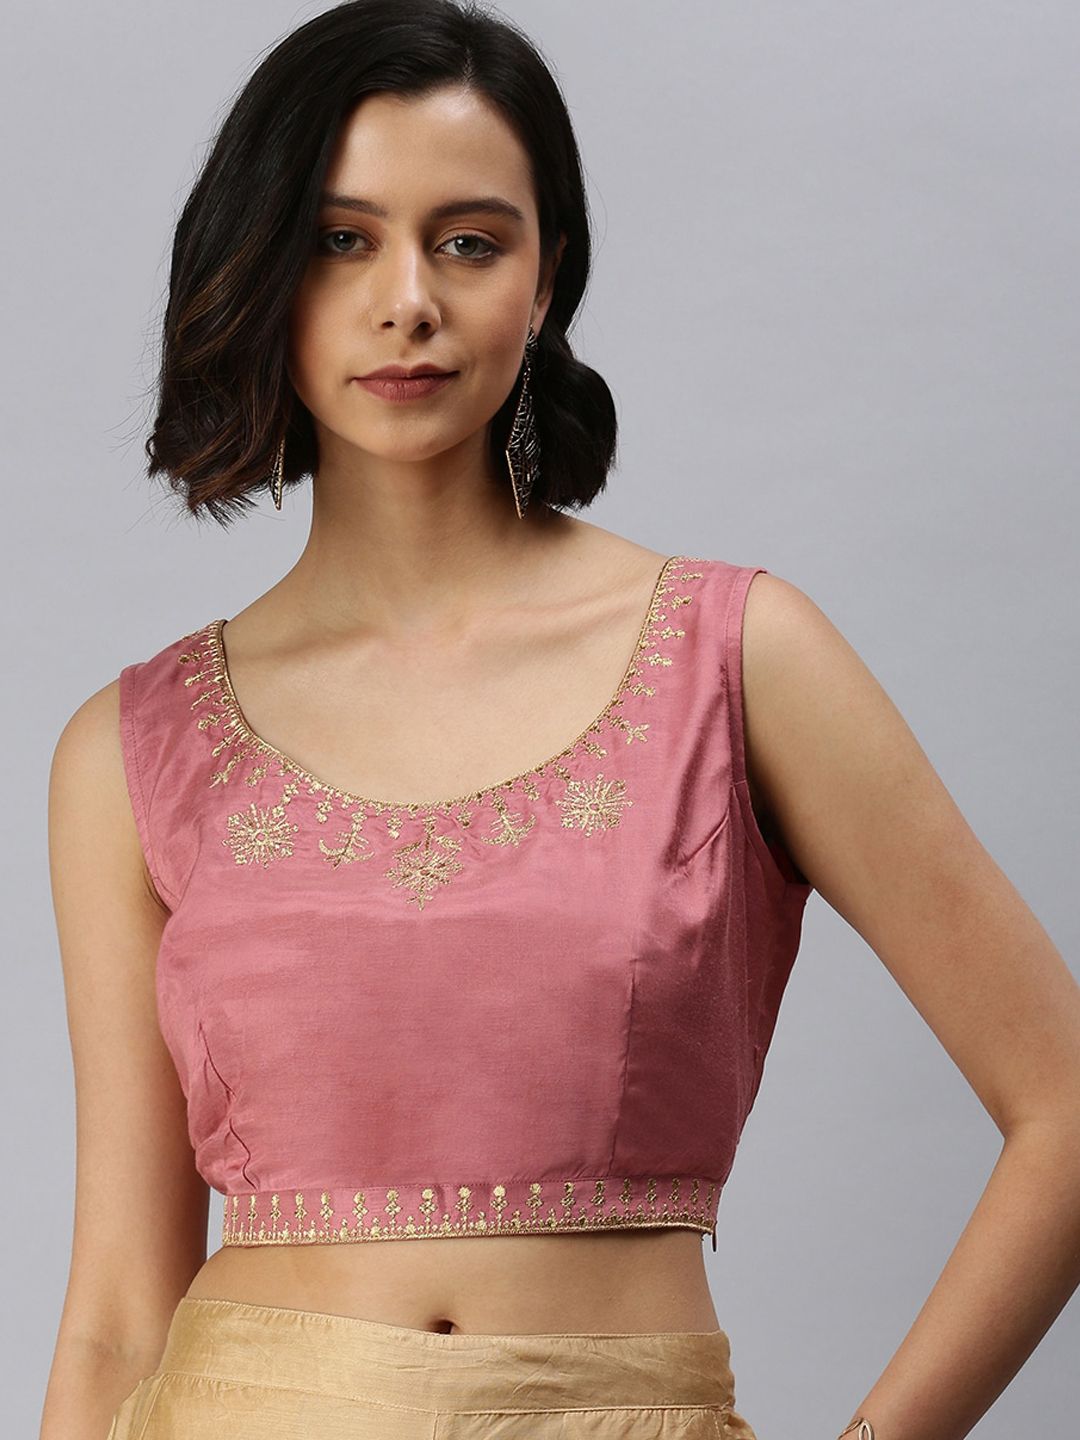 De Moza Rose Embroidered Saree Blouse Price in India